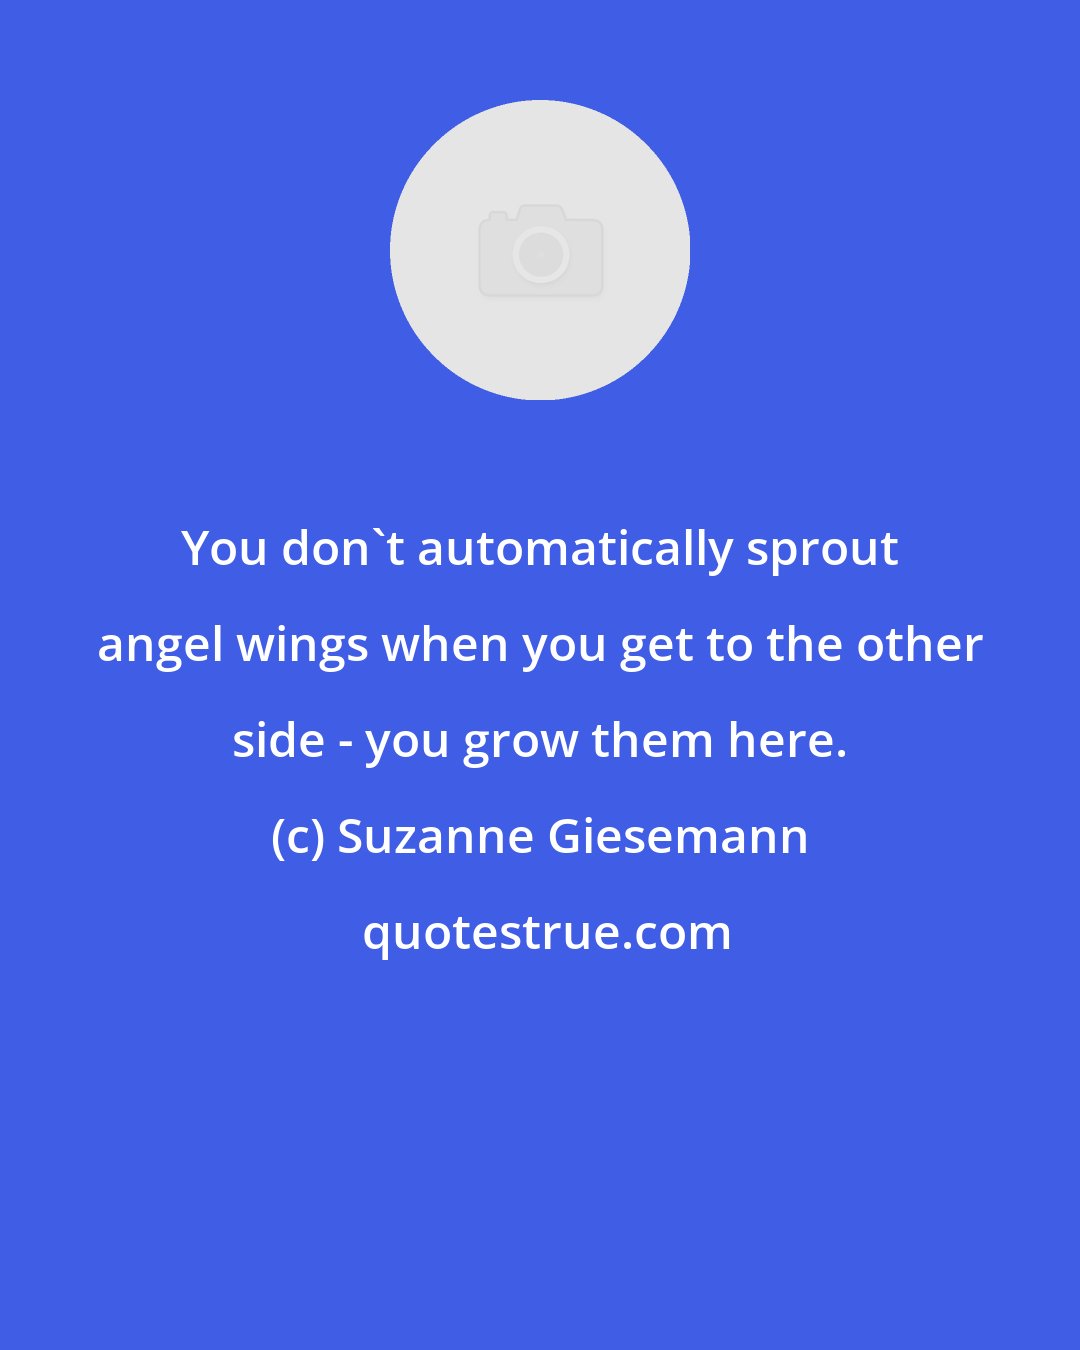 Suzanne Giesemann: You don't automatically sprout angel wings when you get to the other side - you grow them here.